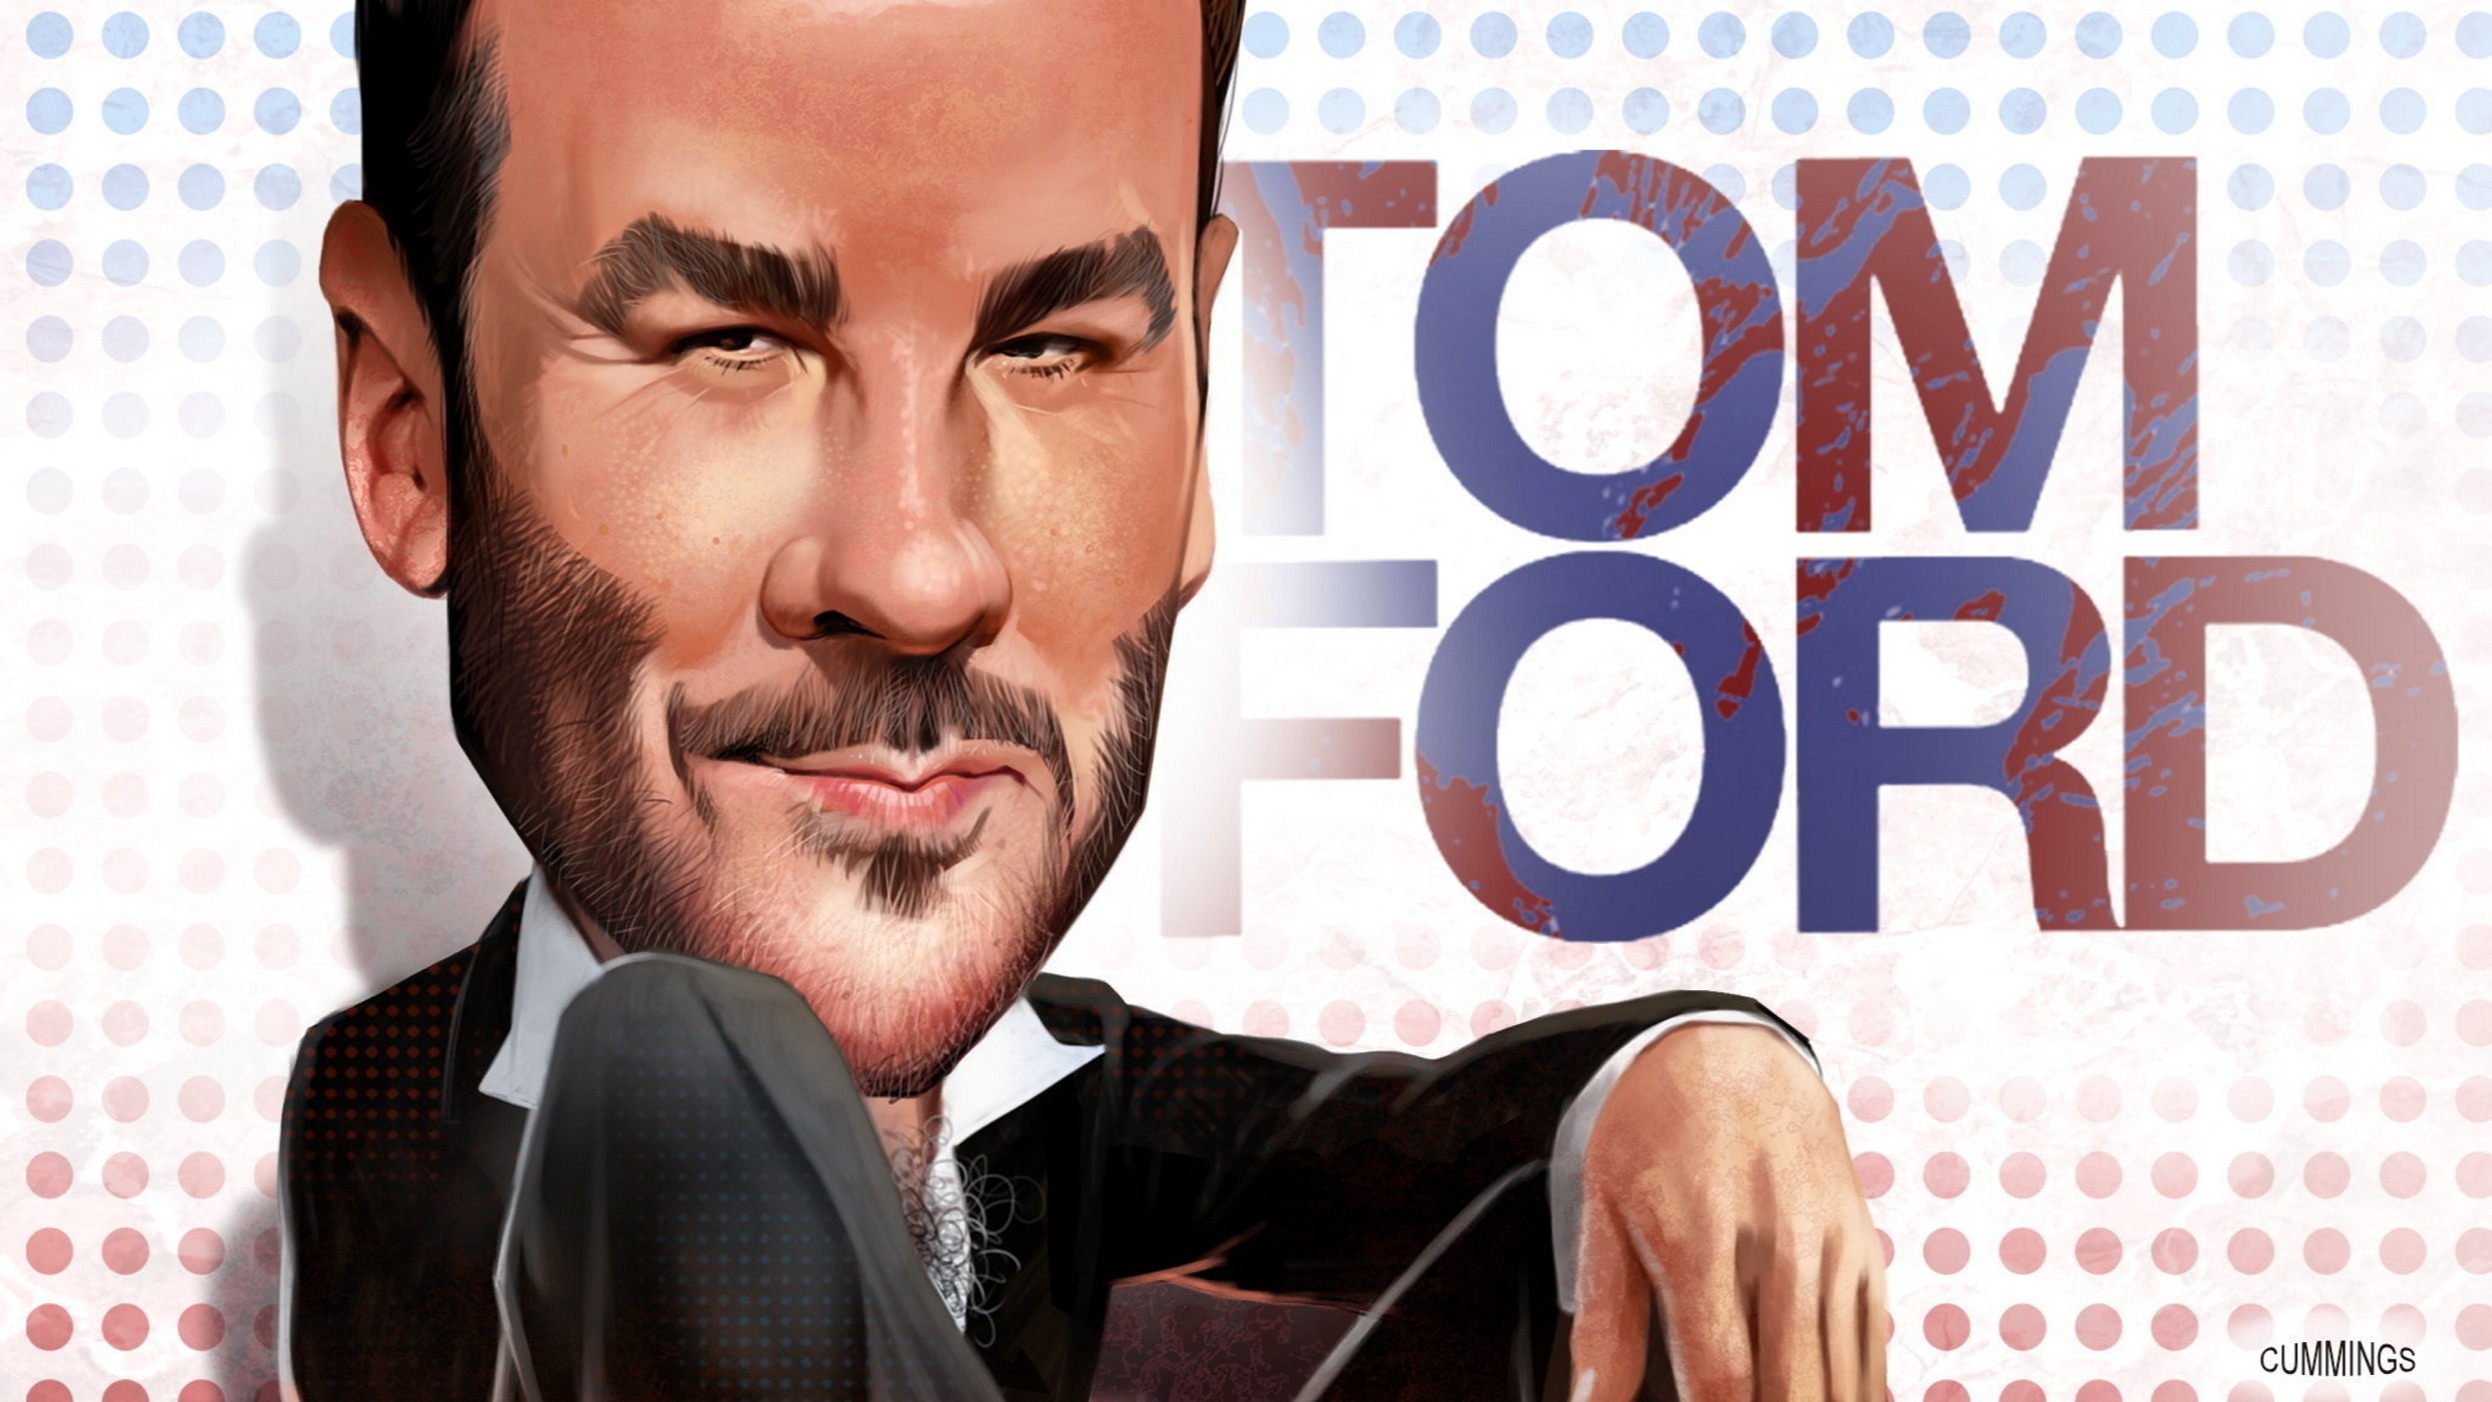 Tom Ford, fashion designer prepares for a lucrative exit | Financial Times